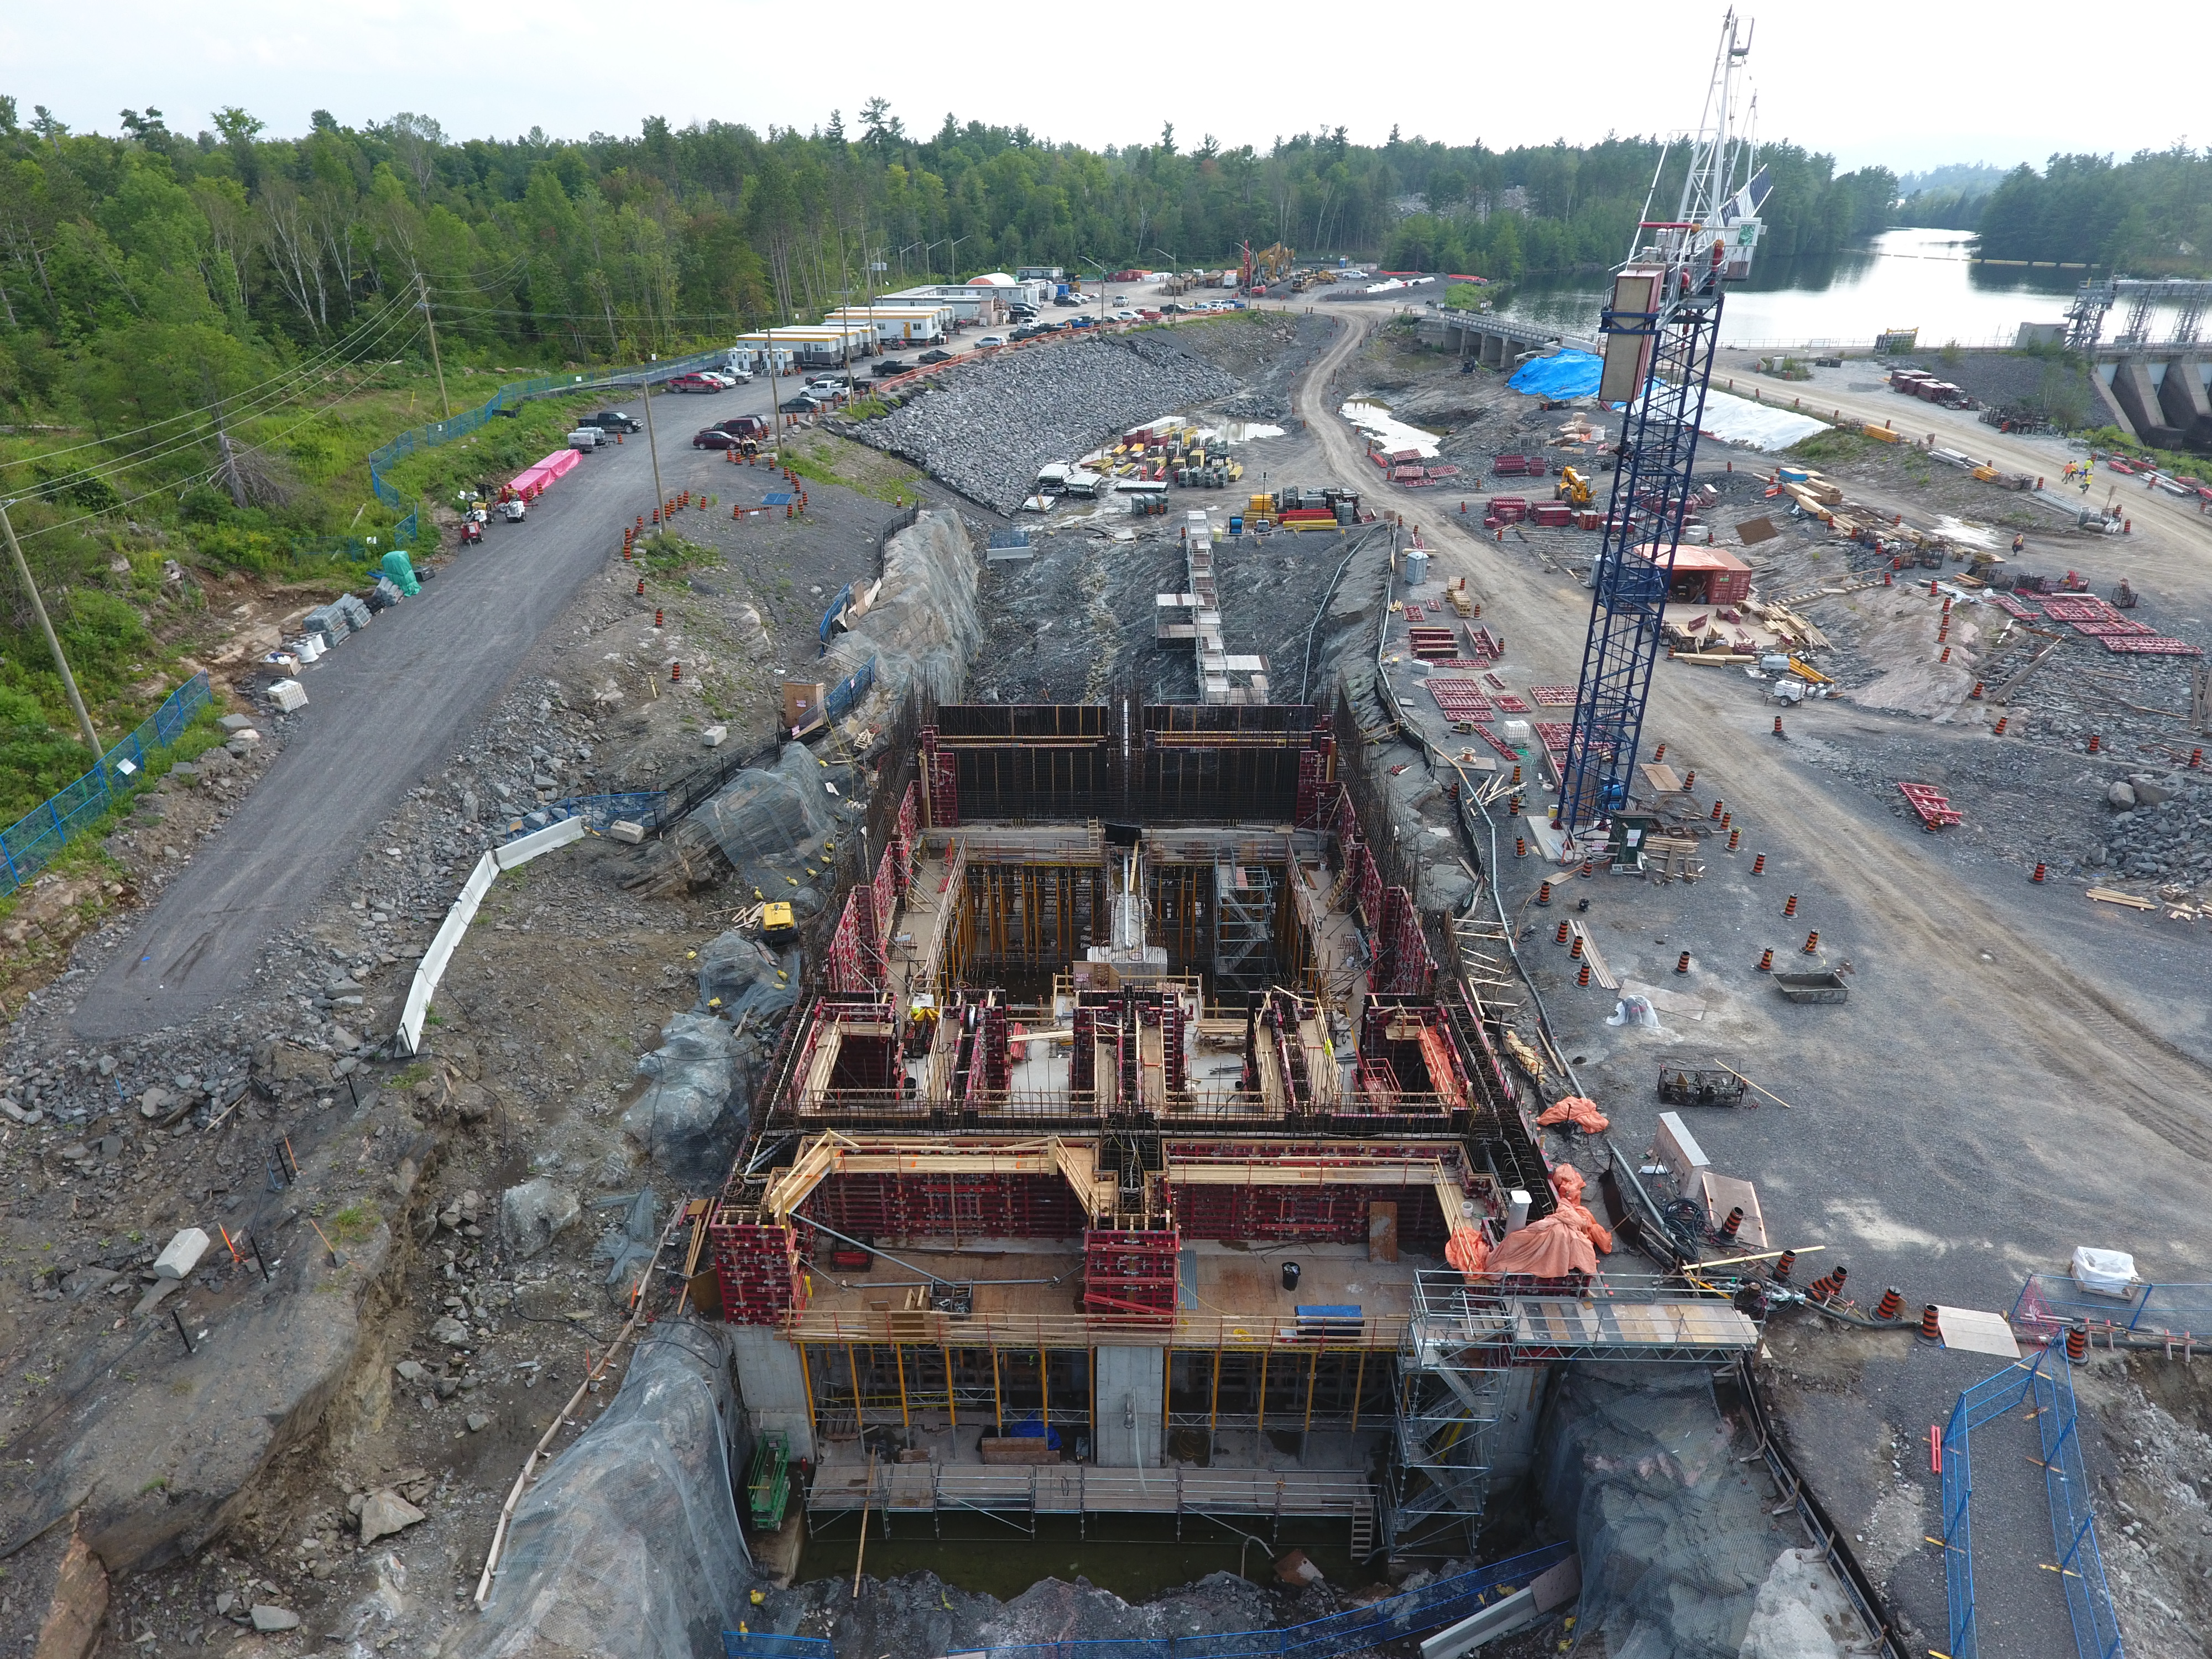 An aerial view of the new Calabogie Generating Station powerhouse under construction, and future home to two horizontal Kaplan turbines that will produce approximately 11 megawatts of clean, renewable power for Ontario.